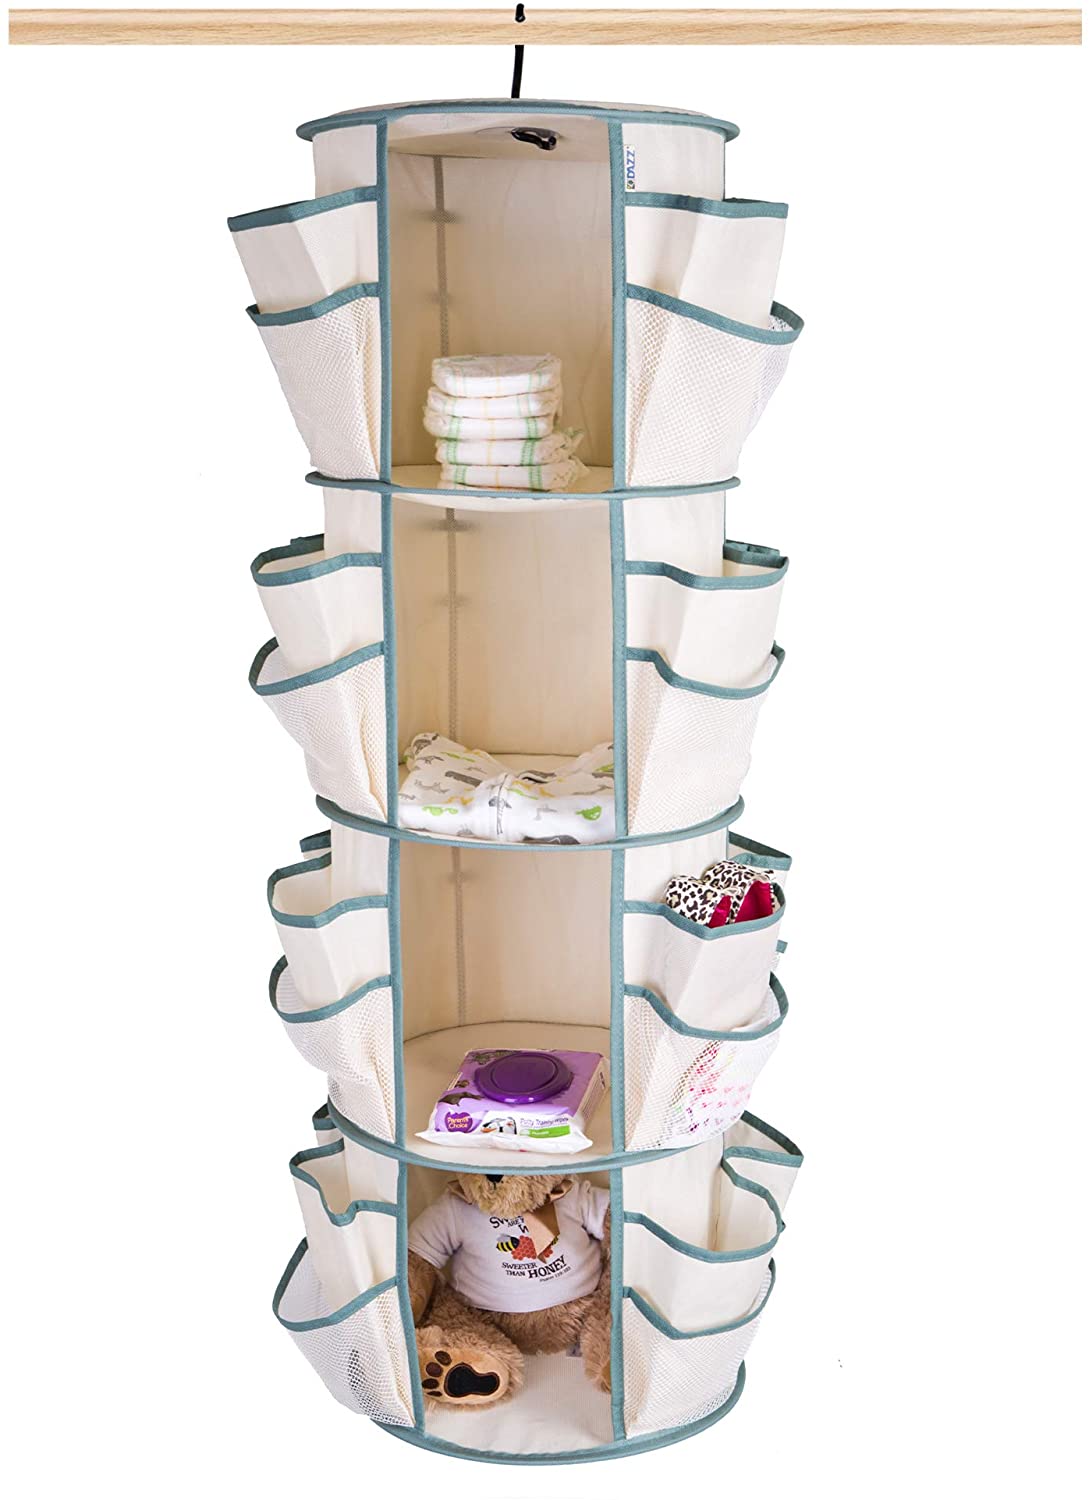 Smart Wardrobe Organizer With Hangers Direct For Sports T Shirts,  Sundresses, And Swimsuits Store And Protect Your Bra, Vest, Or Underwear  From Tikopo, $16.17